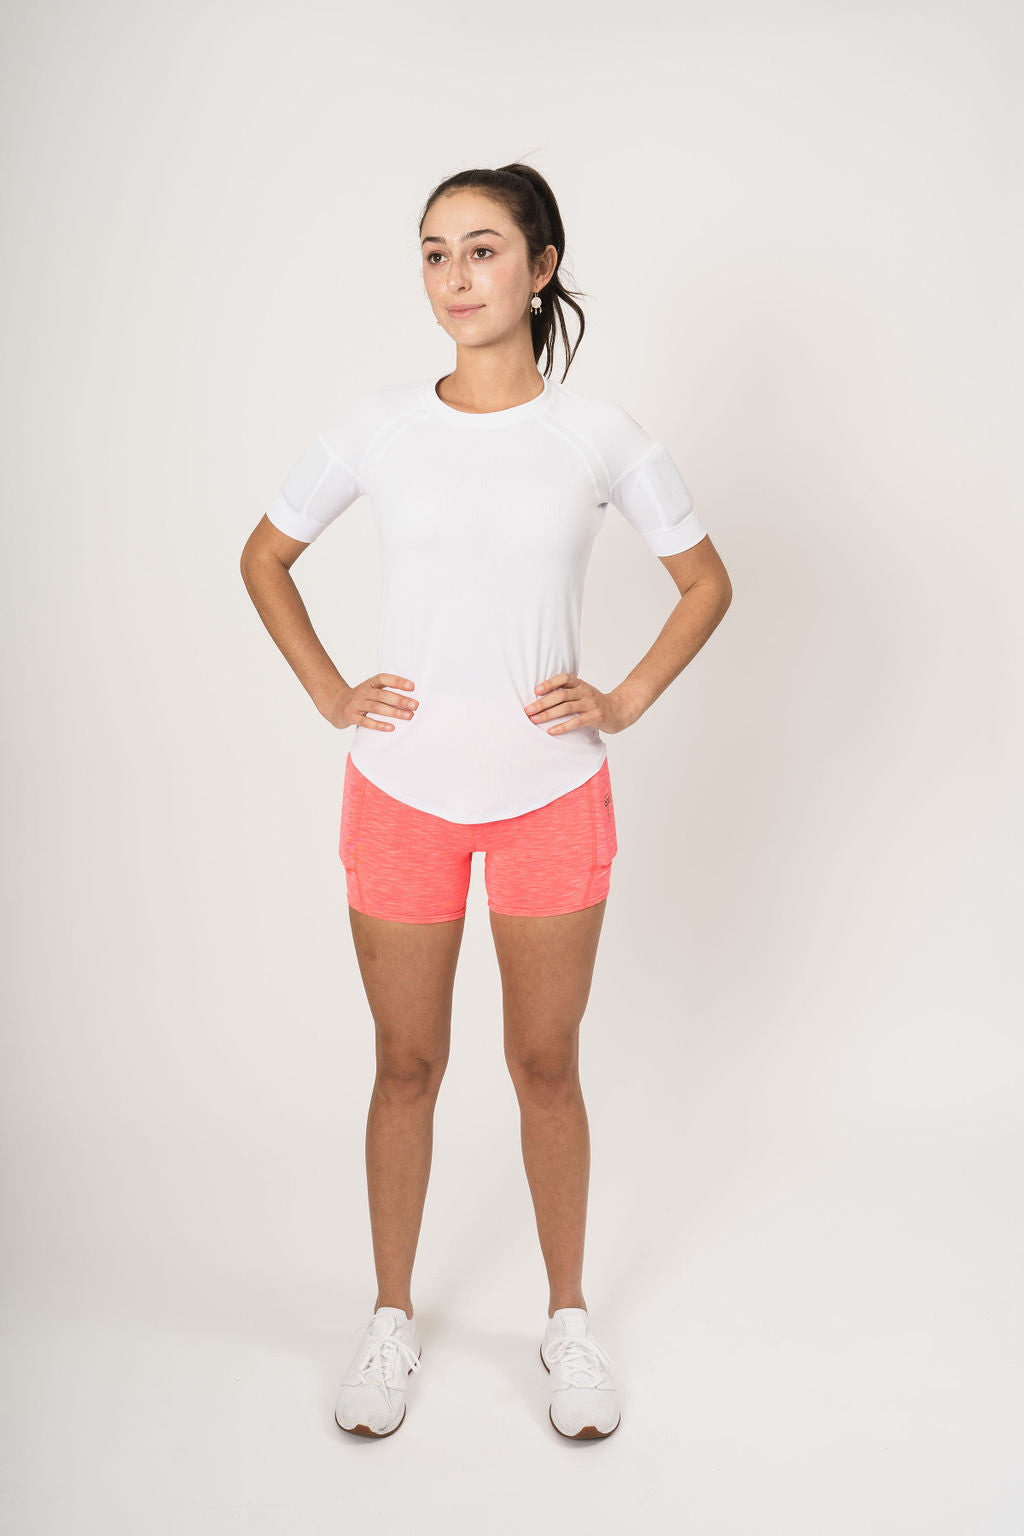 front picture showing woman wearing the weighted white short sleeve with weights on the biceps and the heather coral shorts with weights in the side weight pockets, found on the quads.